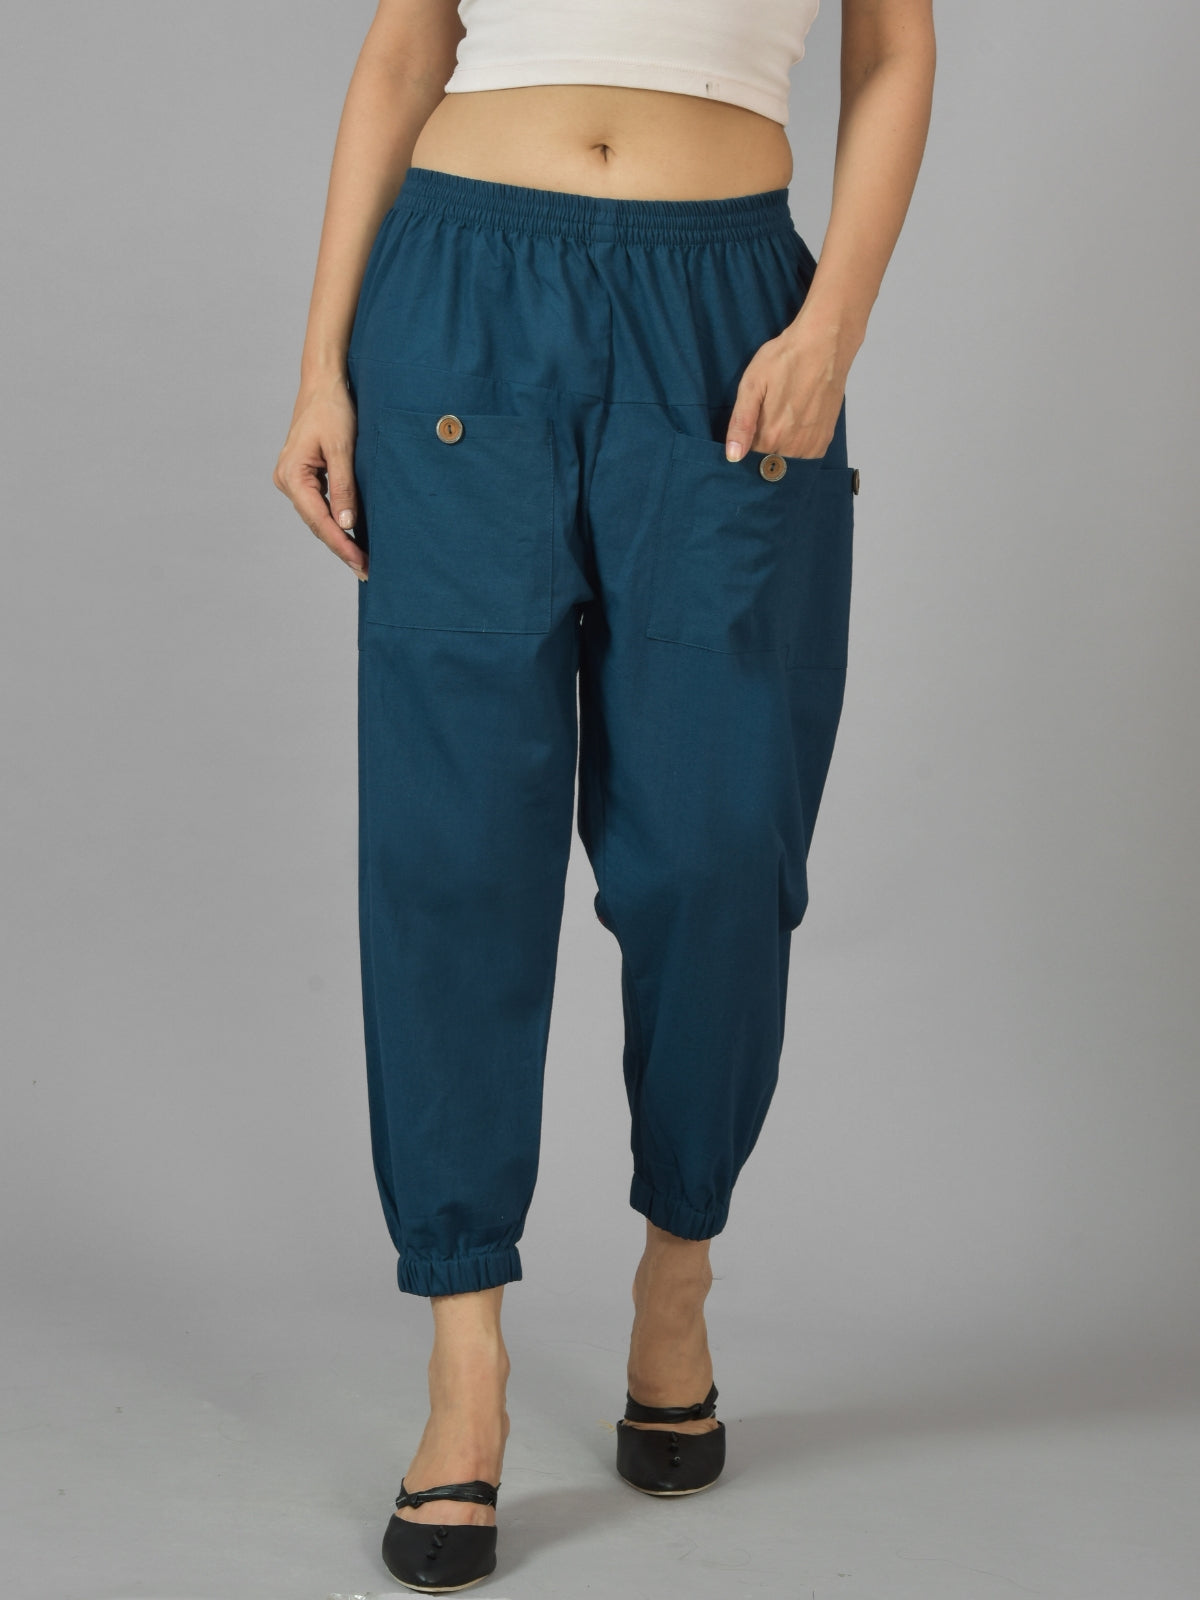 Combo Pack Of Womens Melange Grey And Teal Blue Four Pocket Cotton Cargo Pants